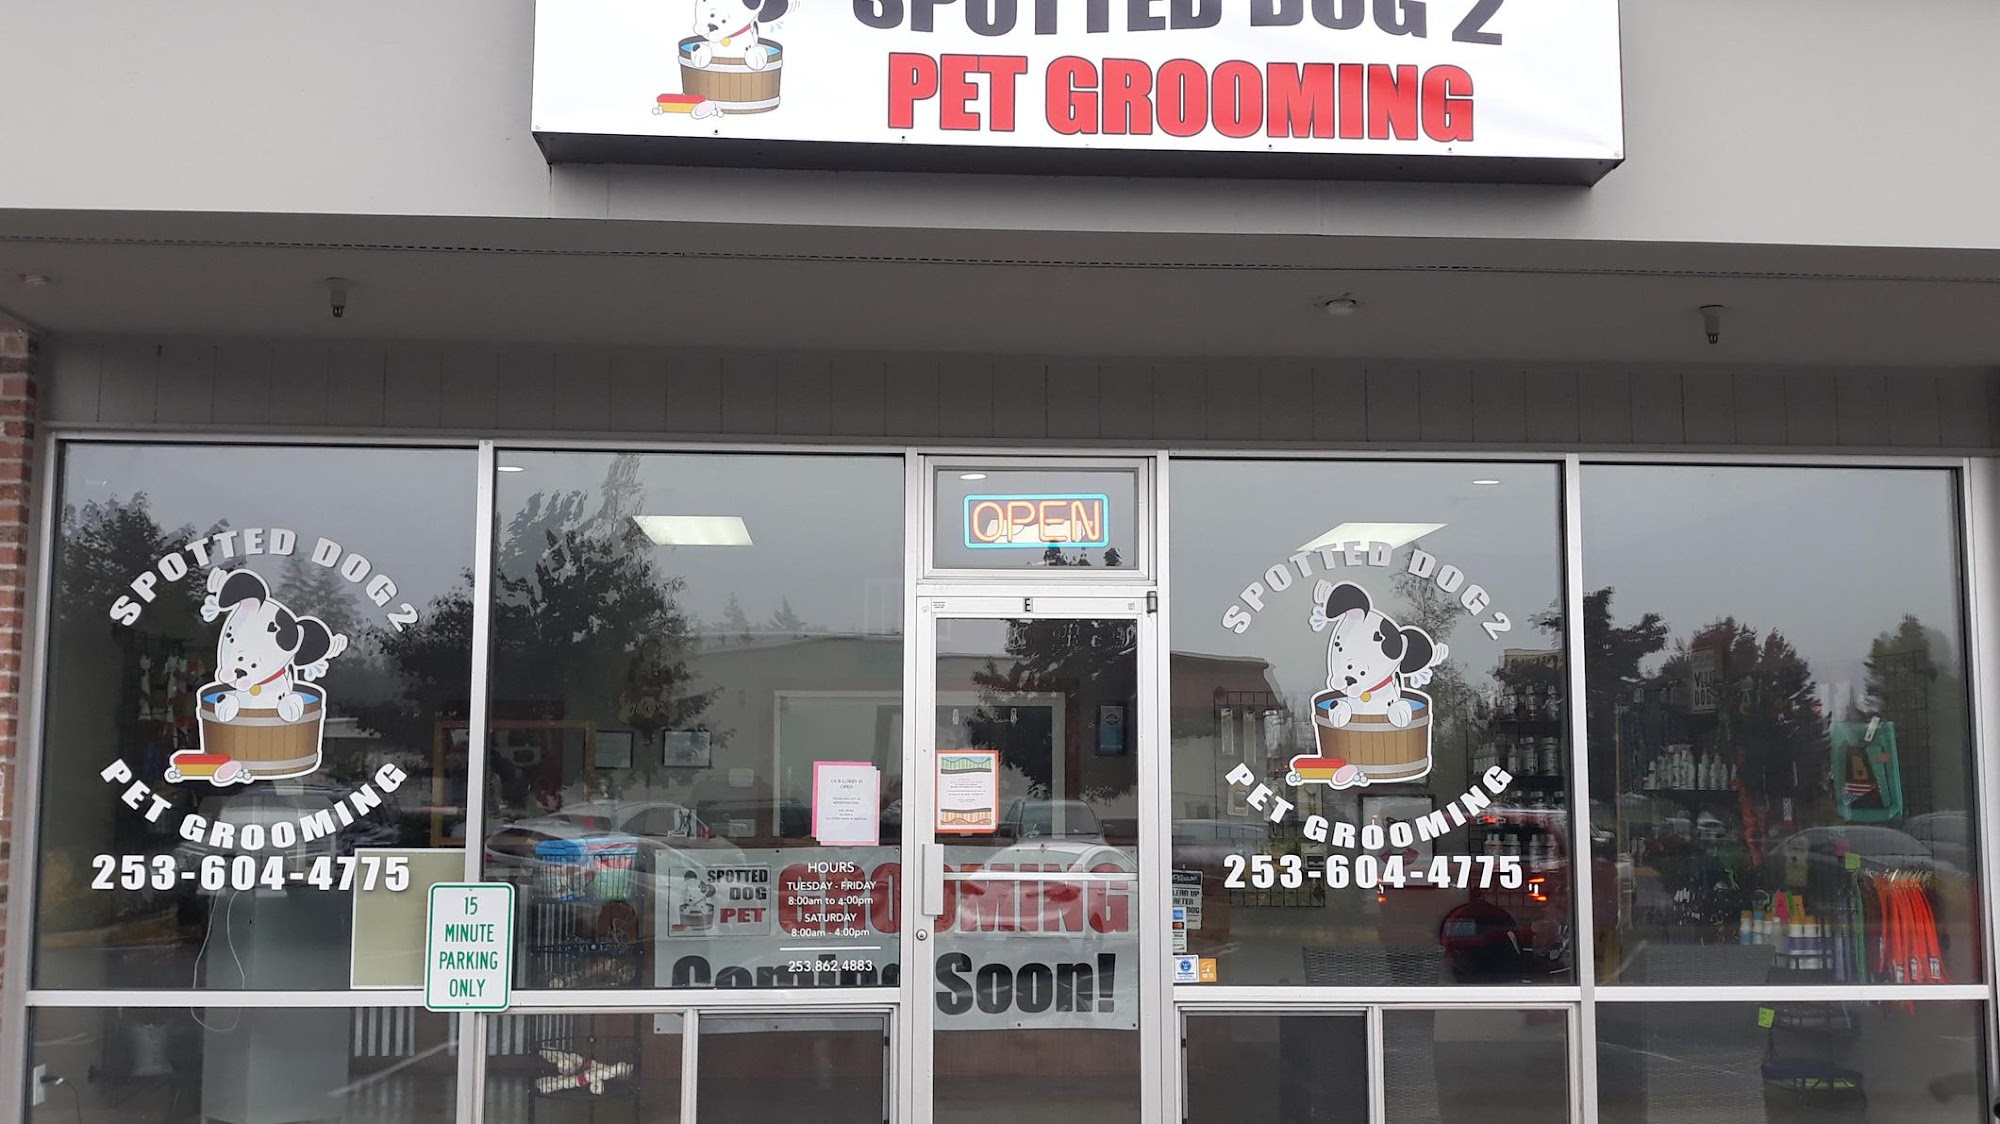 Spotted Dog Pet Grooming 2